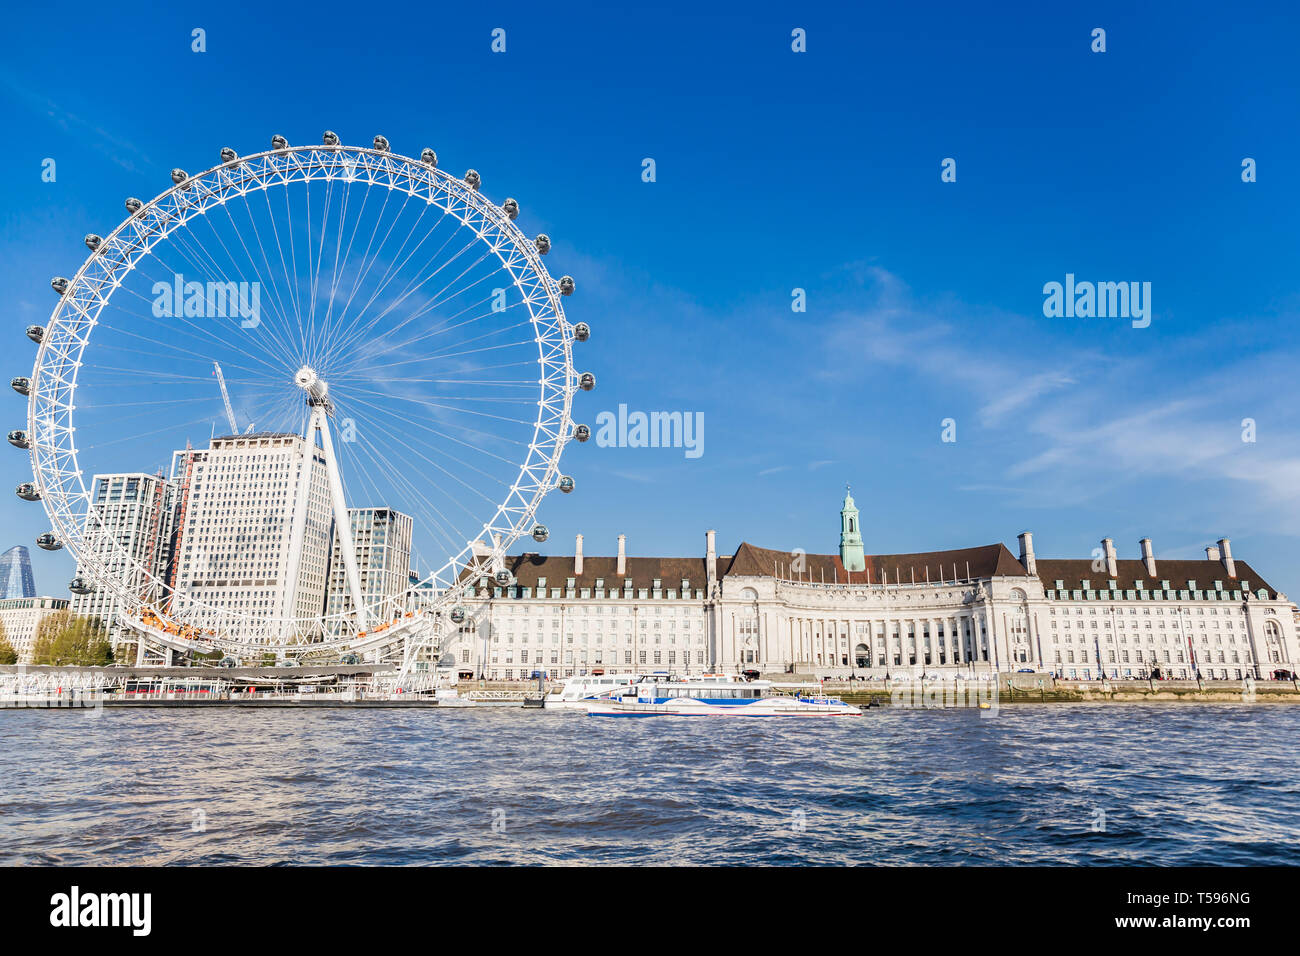 England London - April 20, 2019: London Eye near County Hall in summer view from Thame river boat cruise Stock Photo